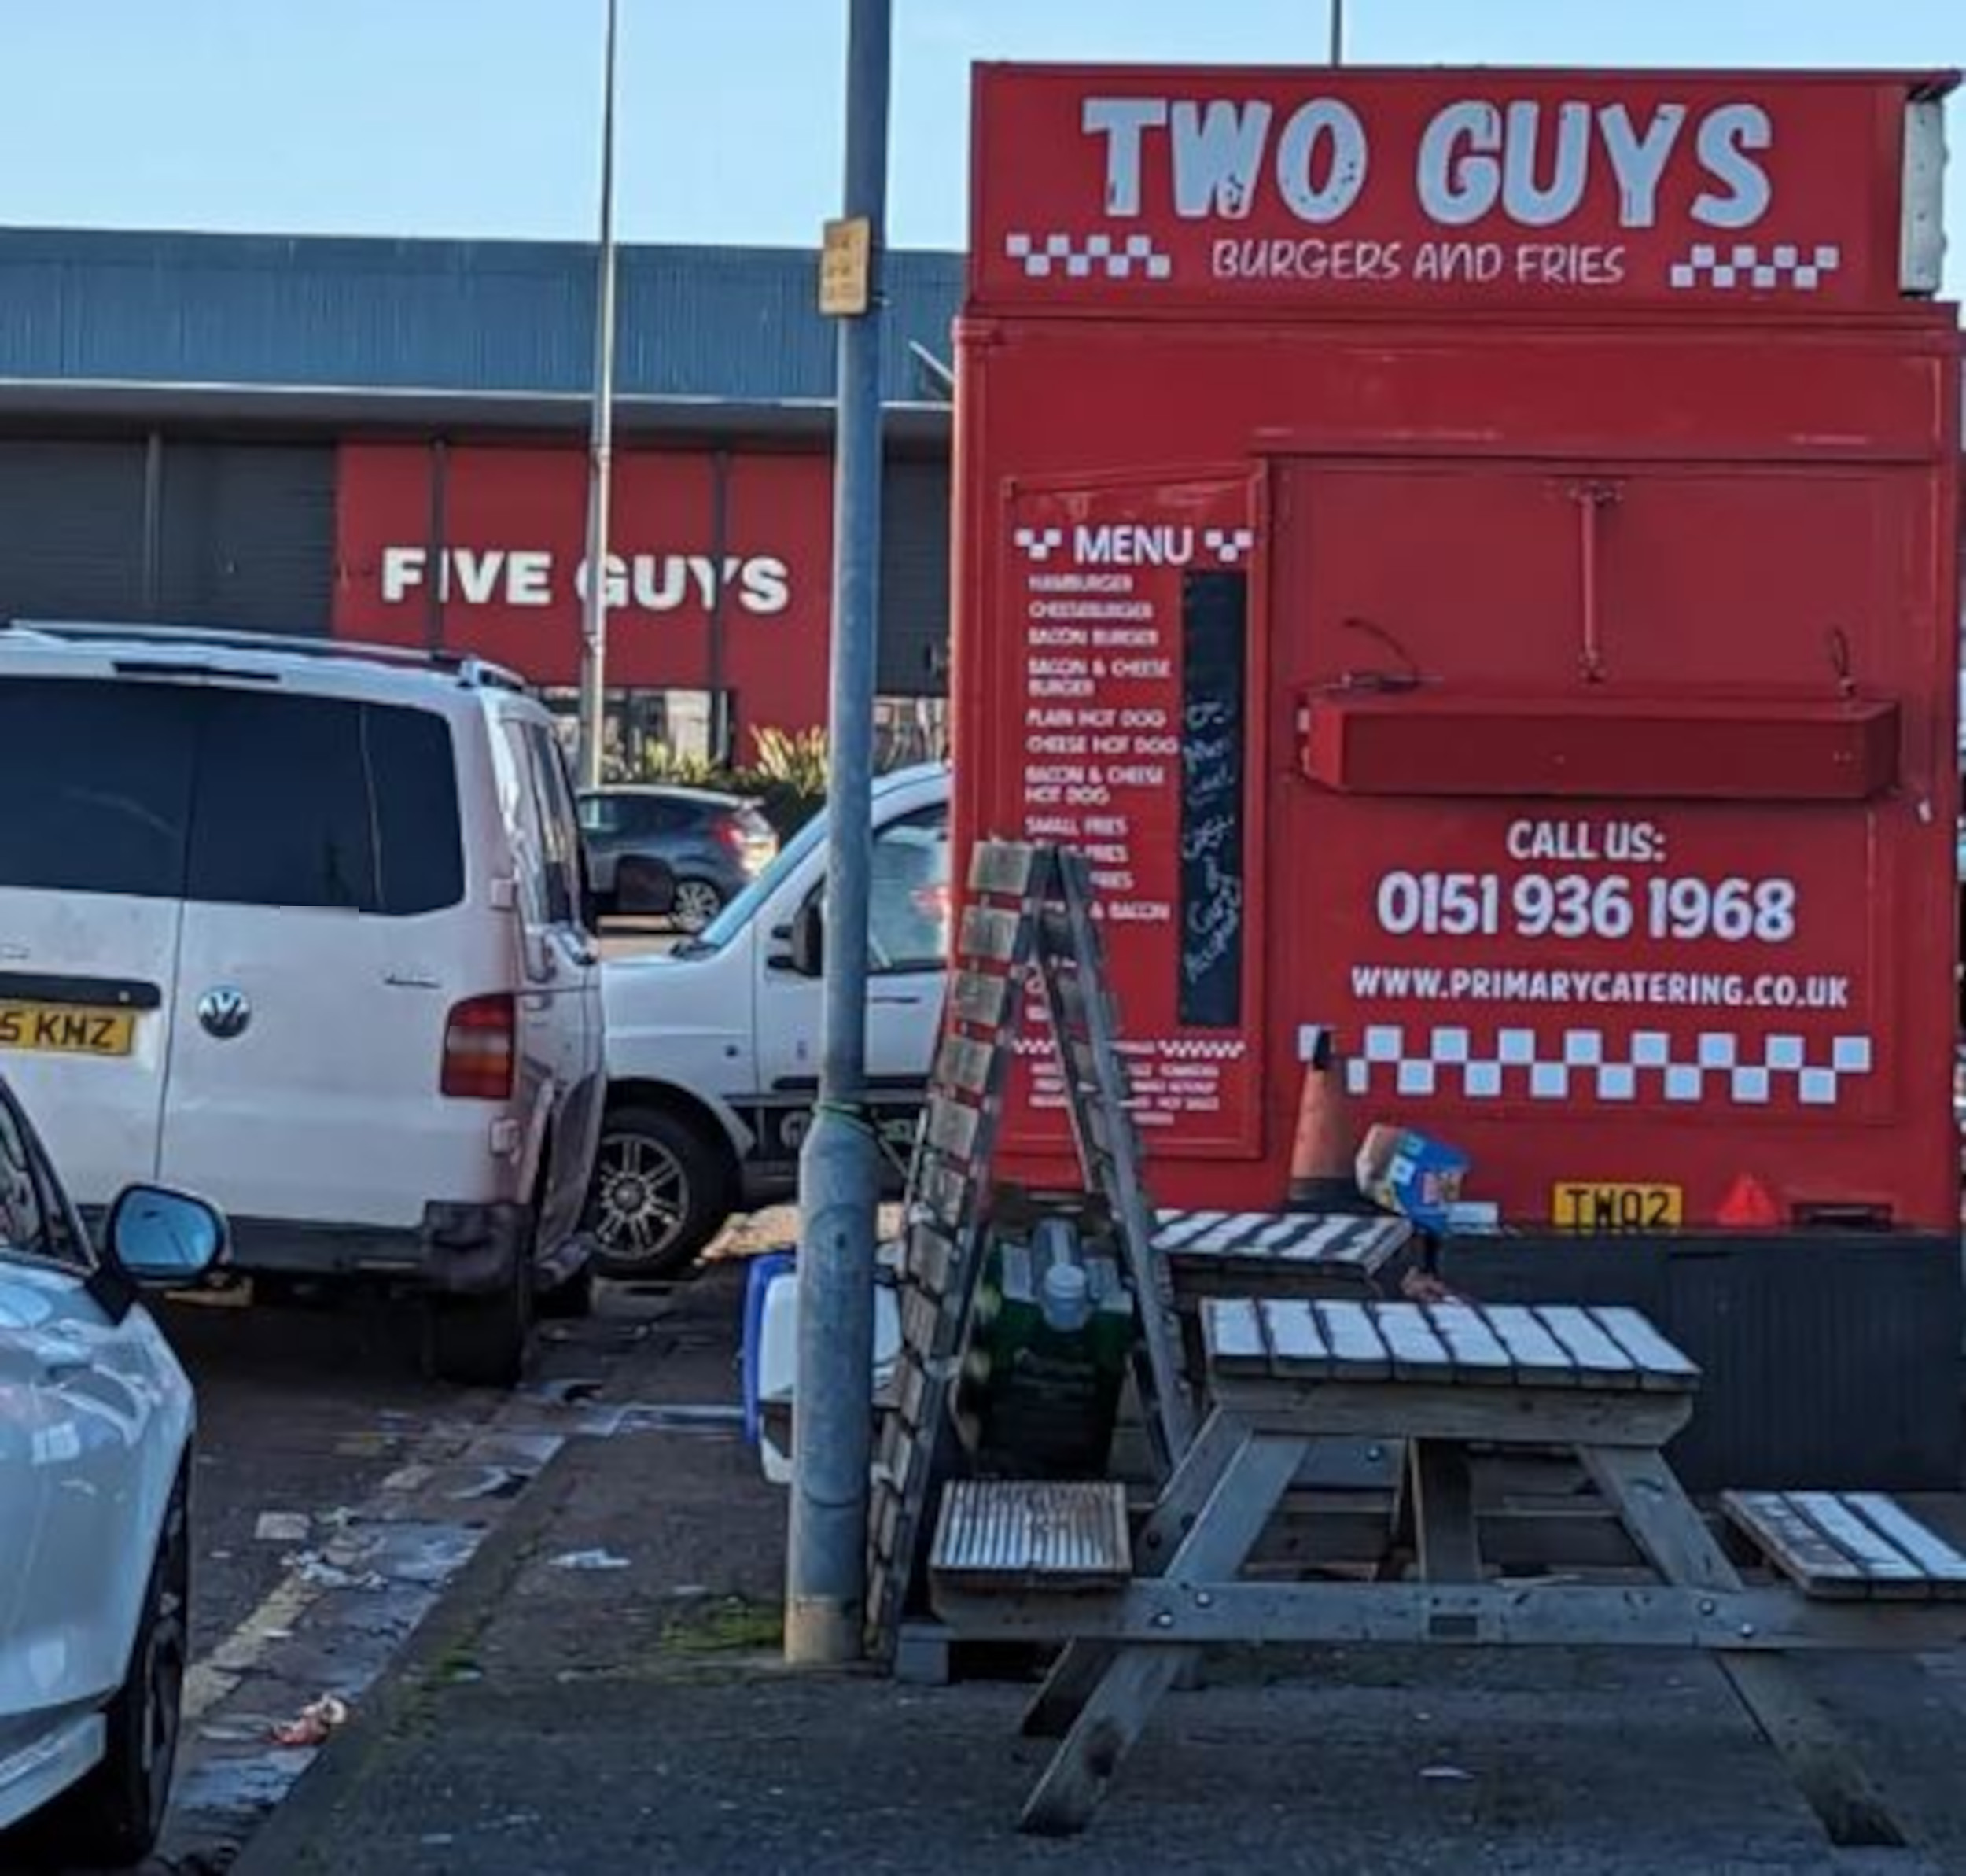 Brits left in stitches after recognizing “brazen” burger van with cheeky jibe at 5 Guys restaurant subsequent door